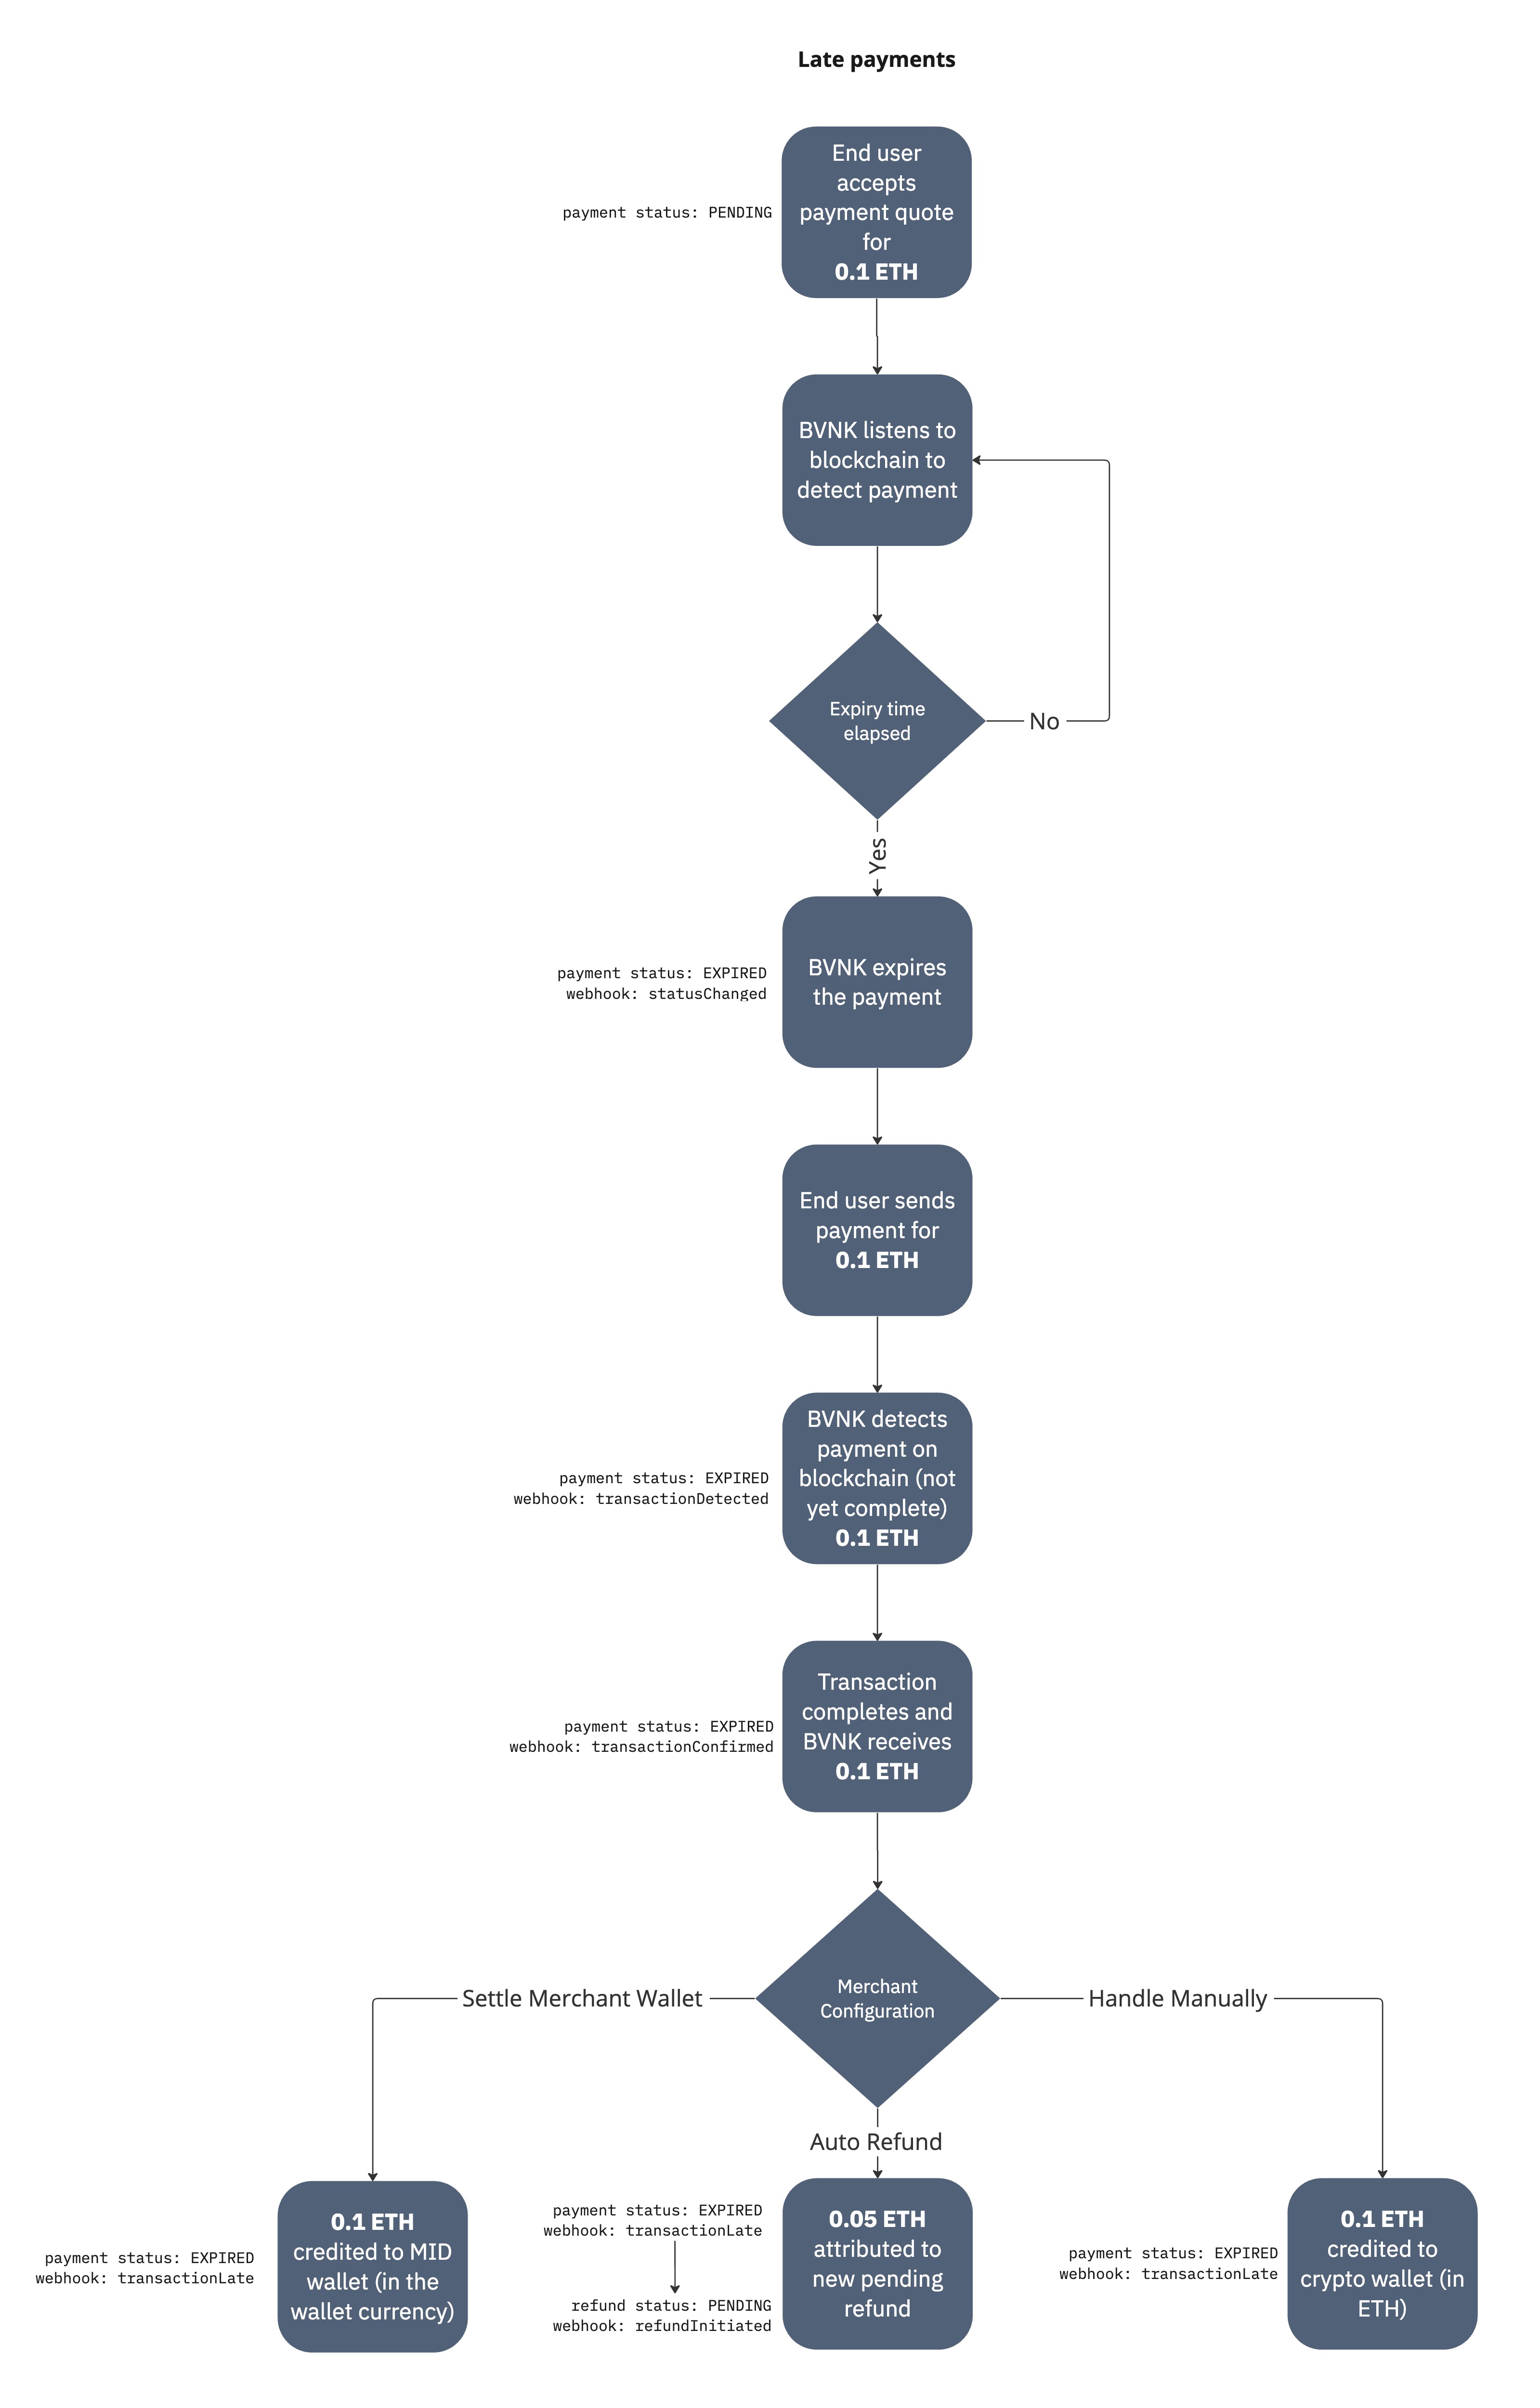 Late payments process flow